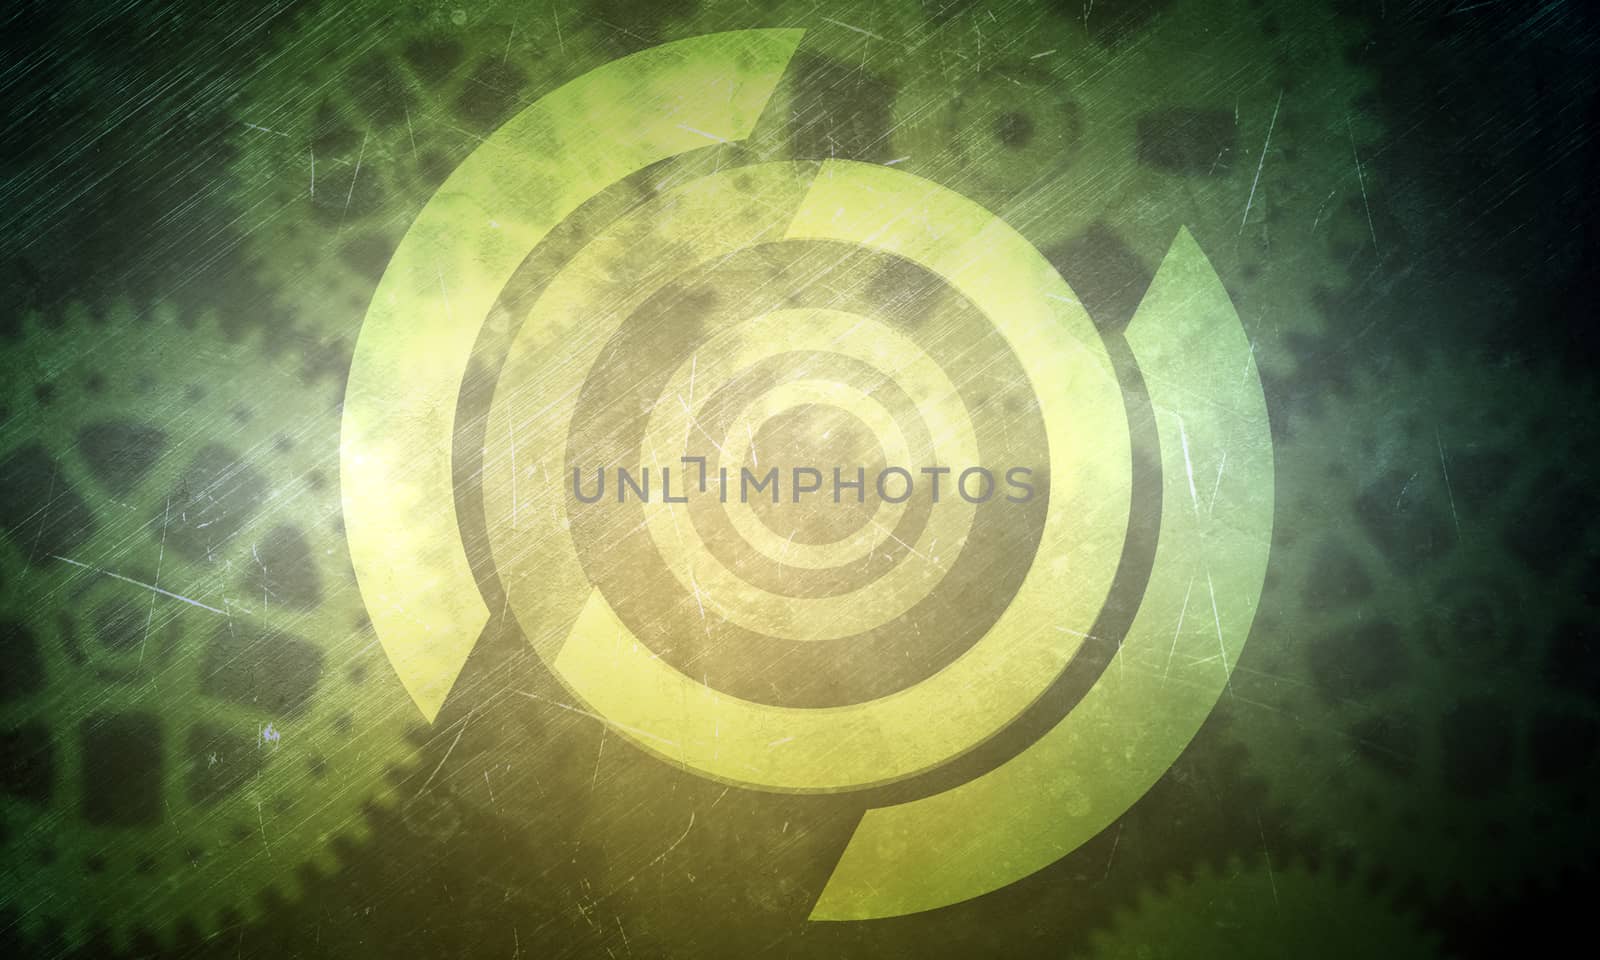 Abstract background with cog wheels by cherezoff